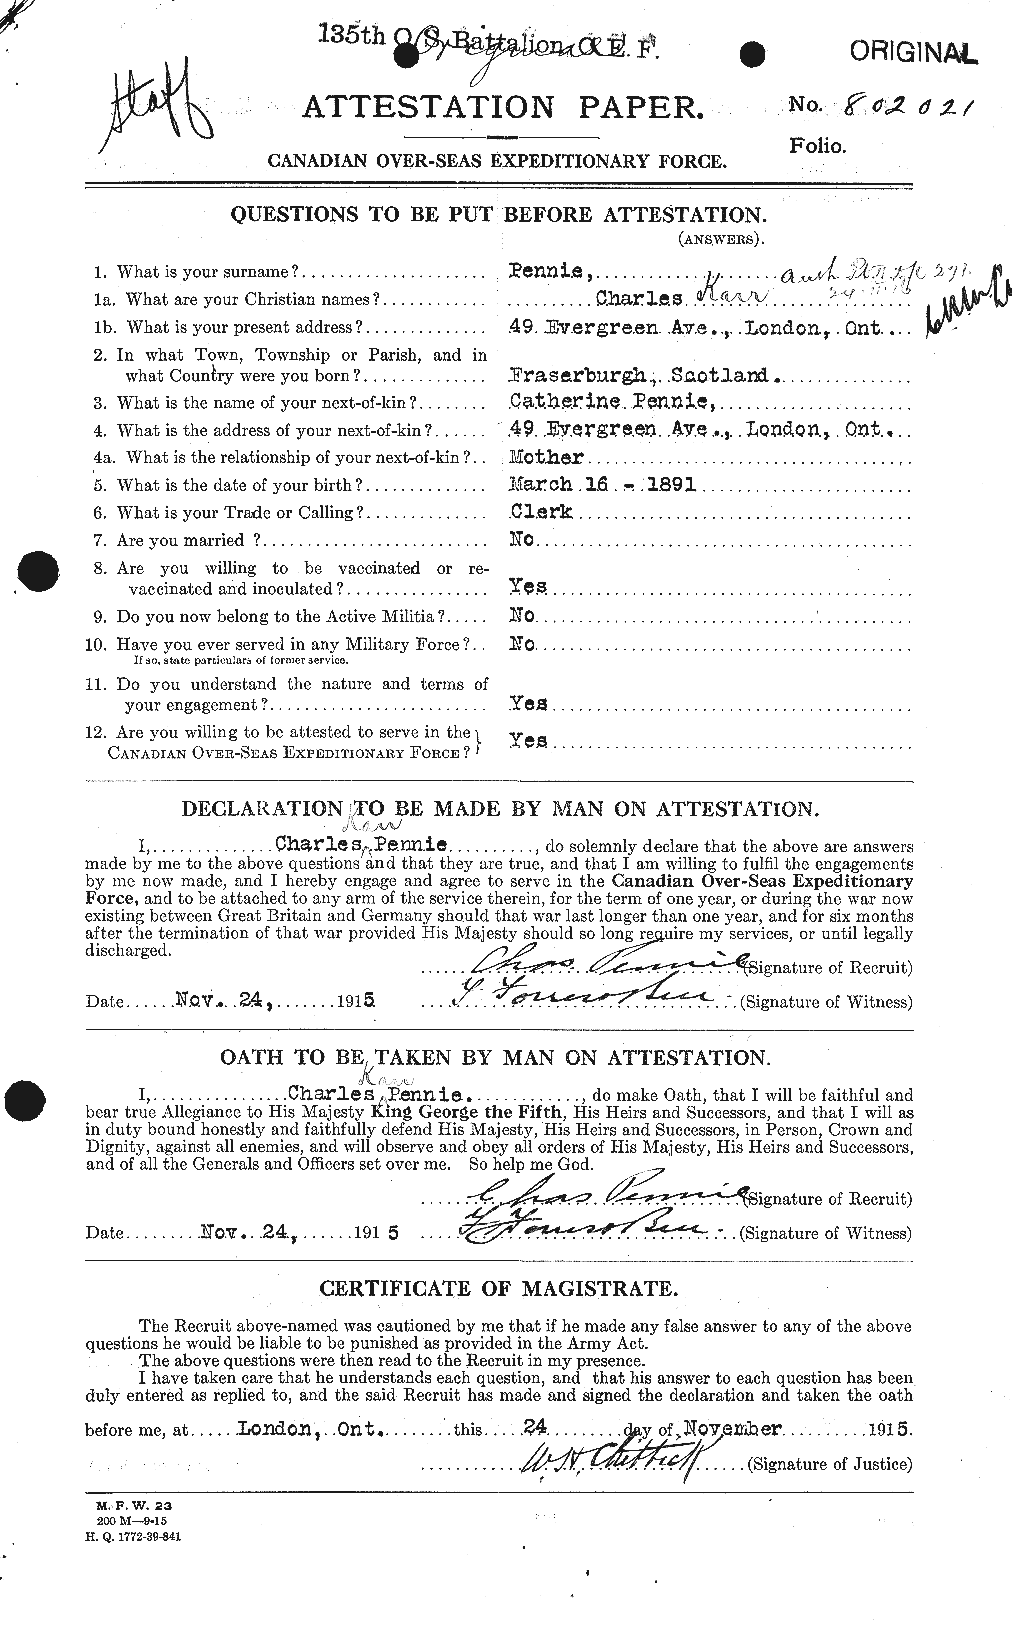 Personnel Records of the First World War - CEF 573187a